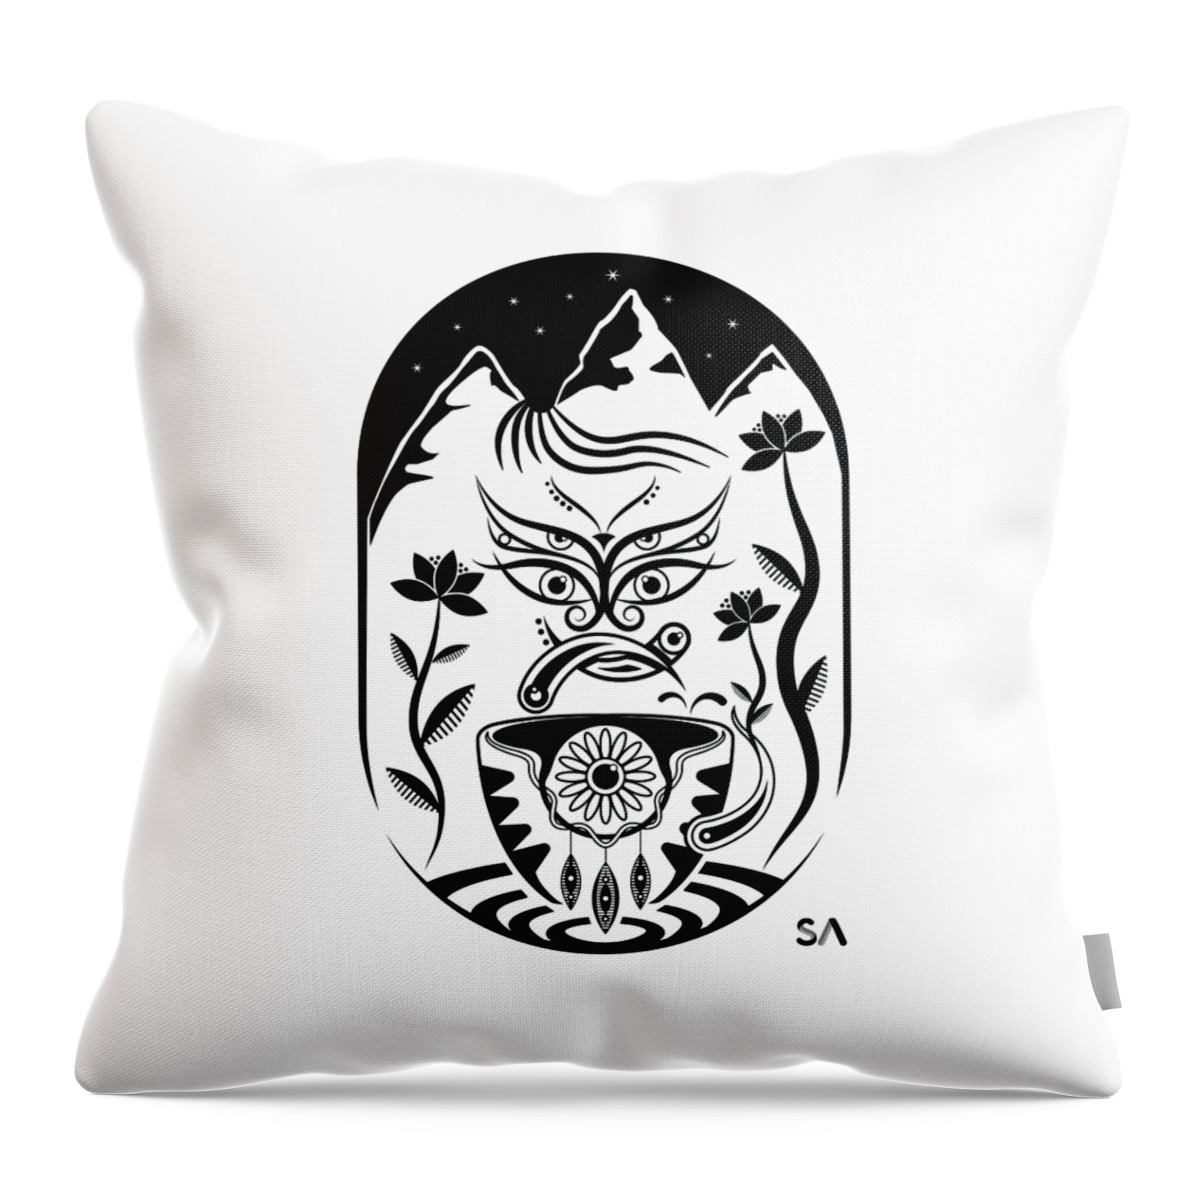 Black And White Throw Pillow featuring the digital art tea by Silvio Ary Cavalcante